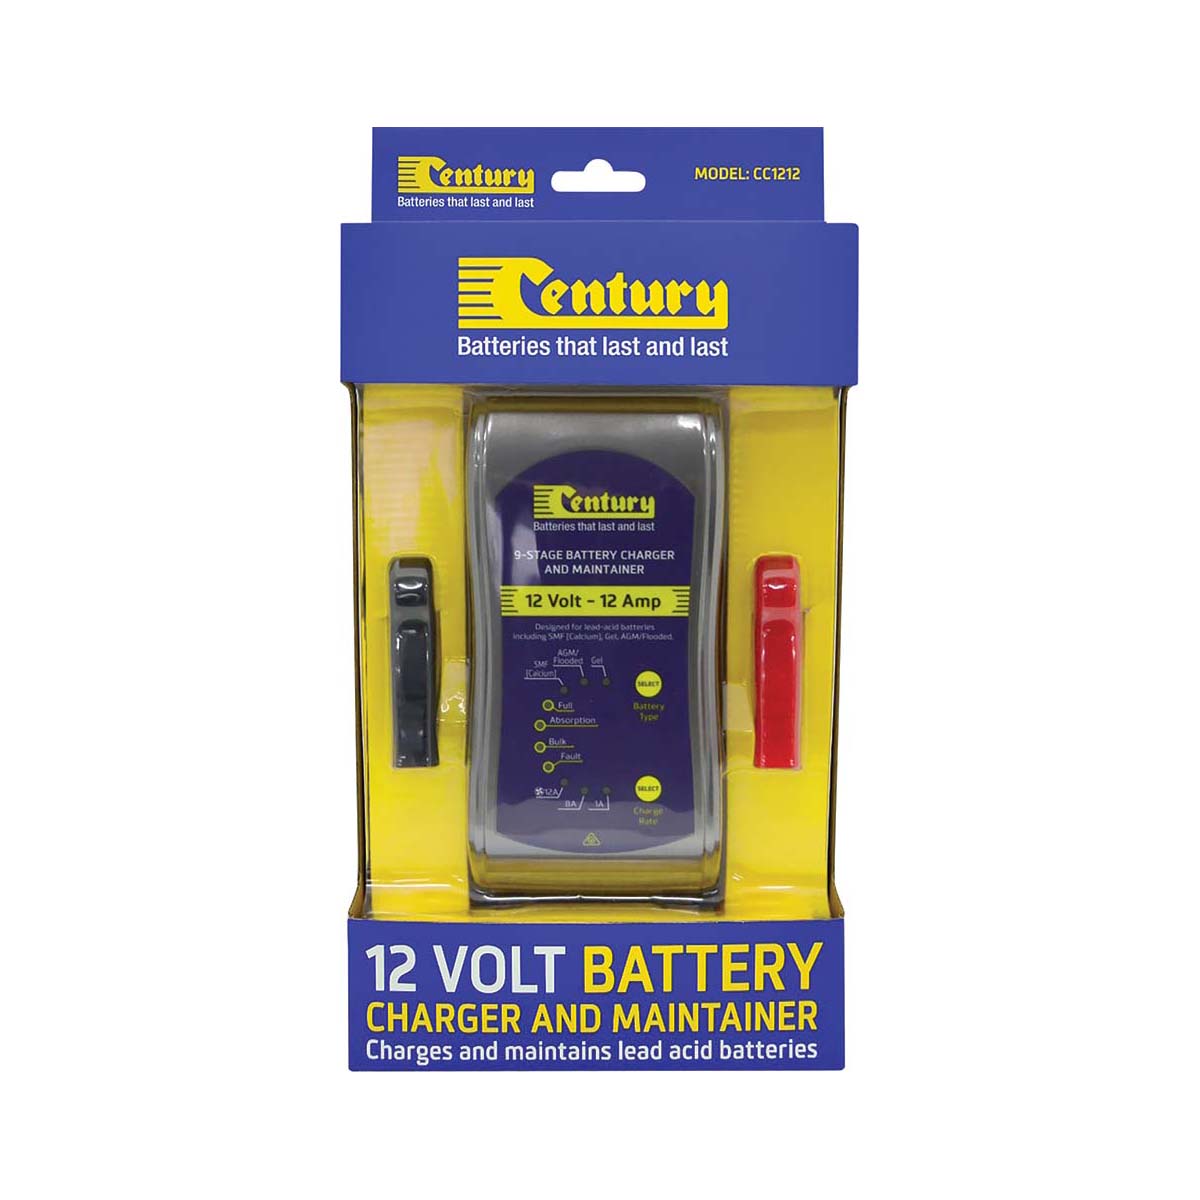 Century CC1212 Battery Charger